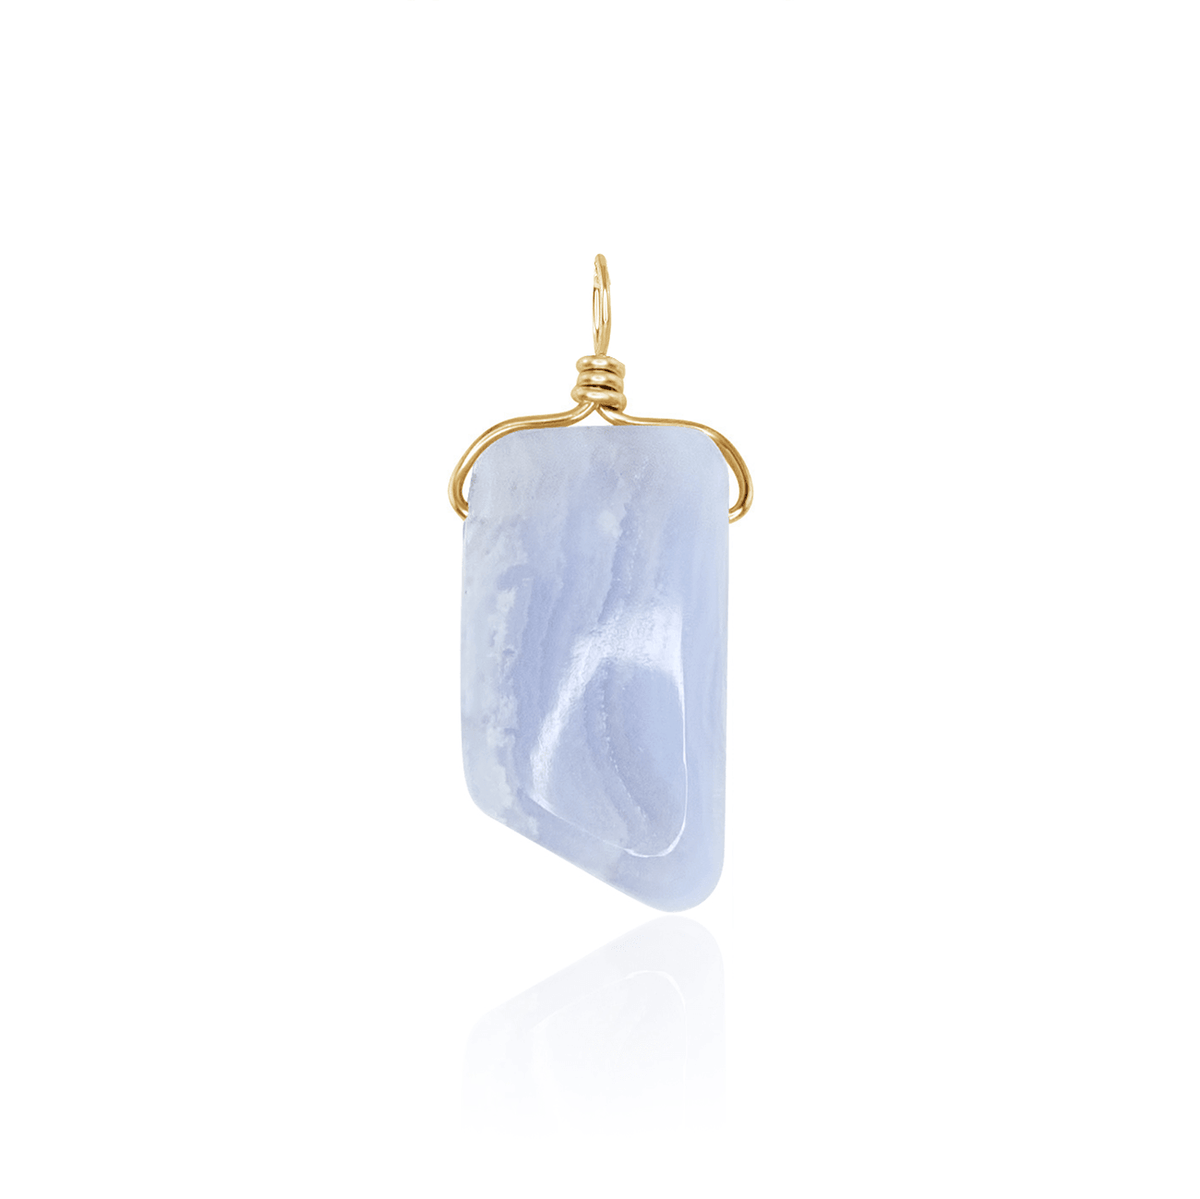 Small Smooth Blue Lace Agate Crystal Pendant with Gentle Point - Small Smooth Blue Lace Agate Crystal Pendant with Gentle Point - 14k Gold Fill - Luna Tide Handmade Crystal Jewellery